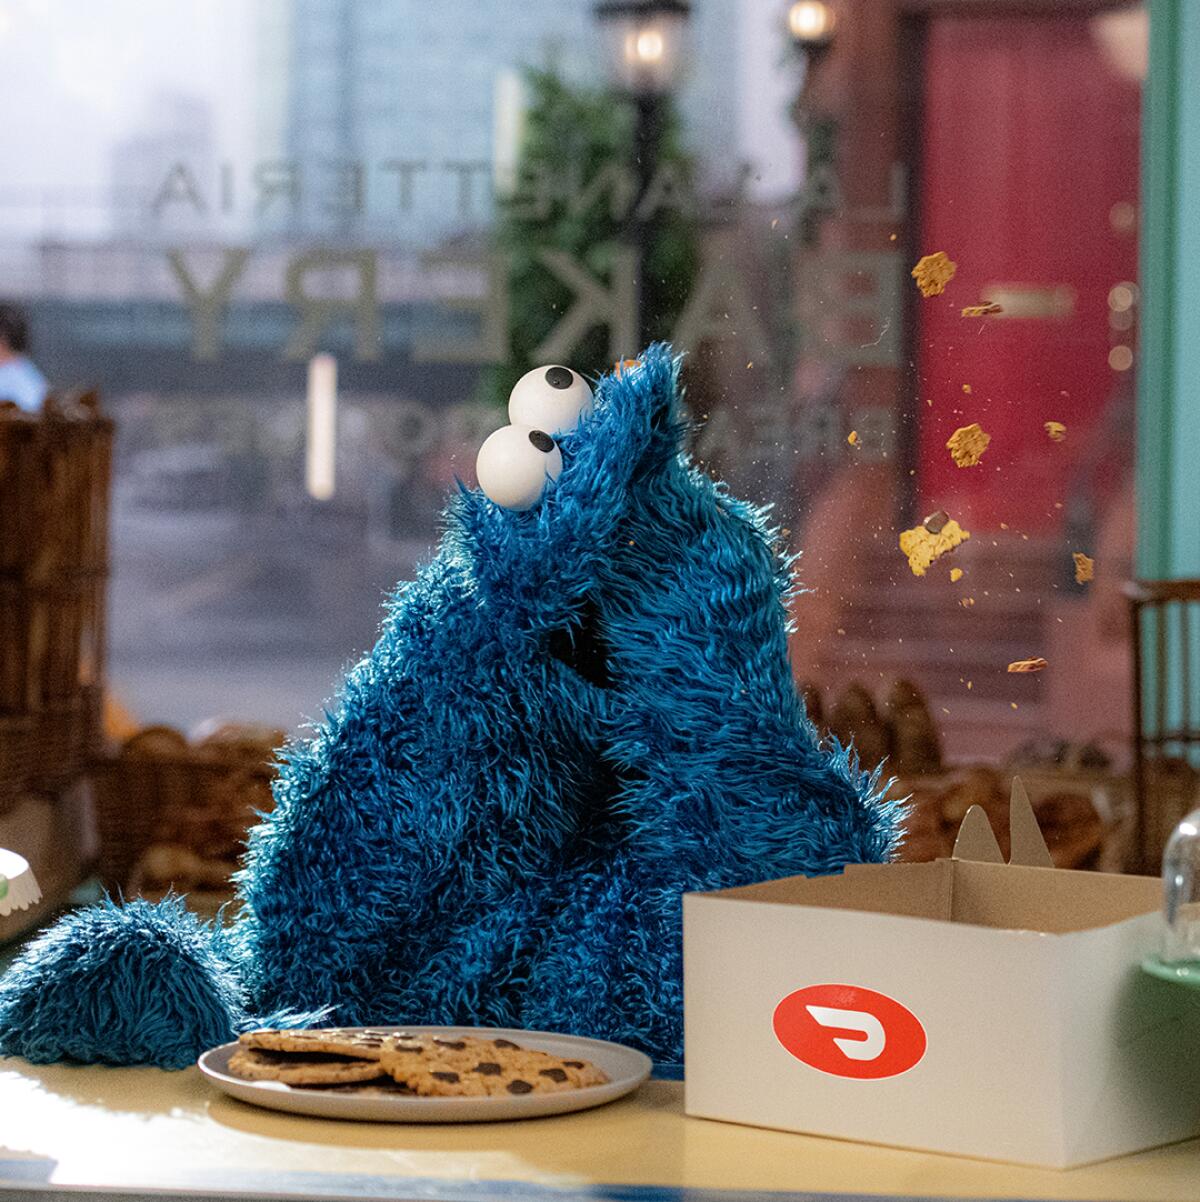 Cookie Monster eating cookies from a box